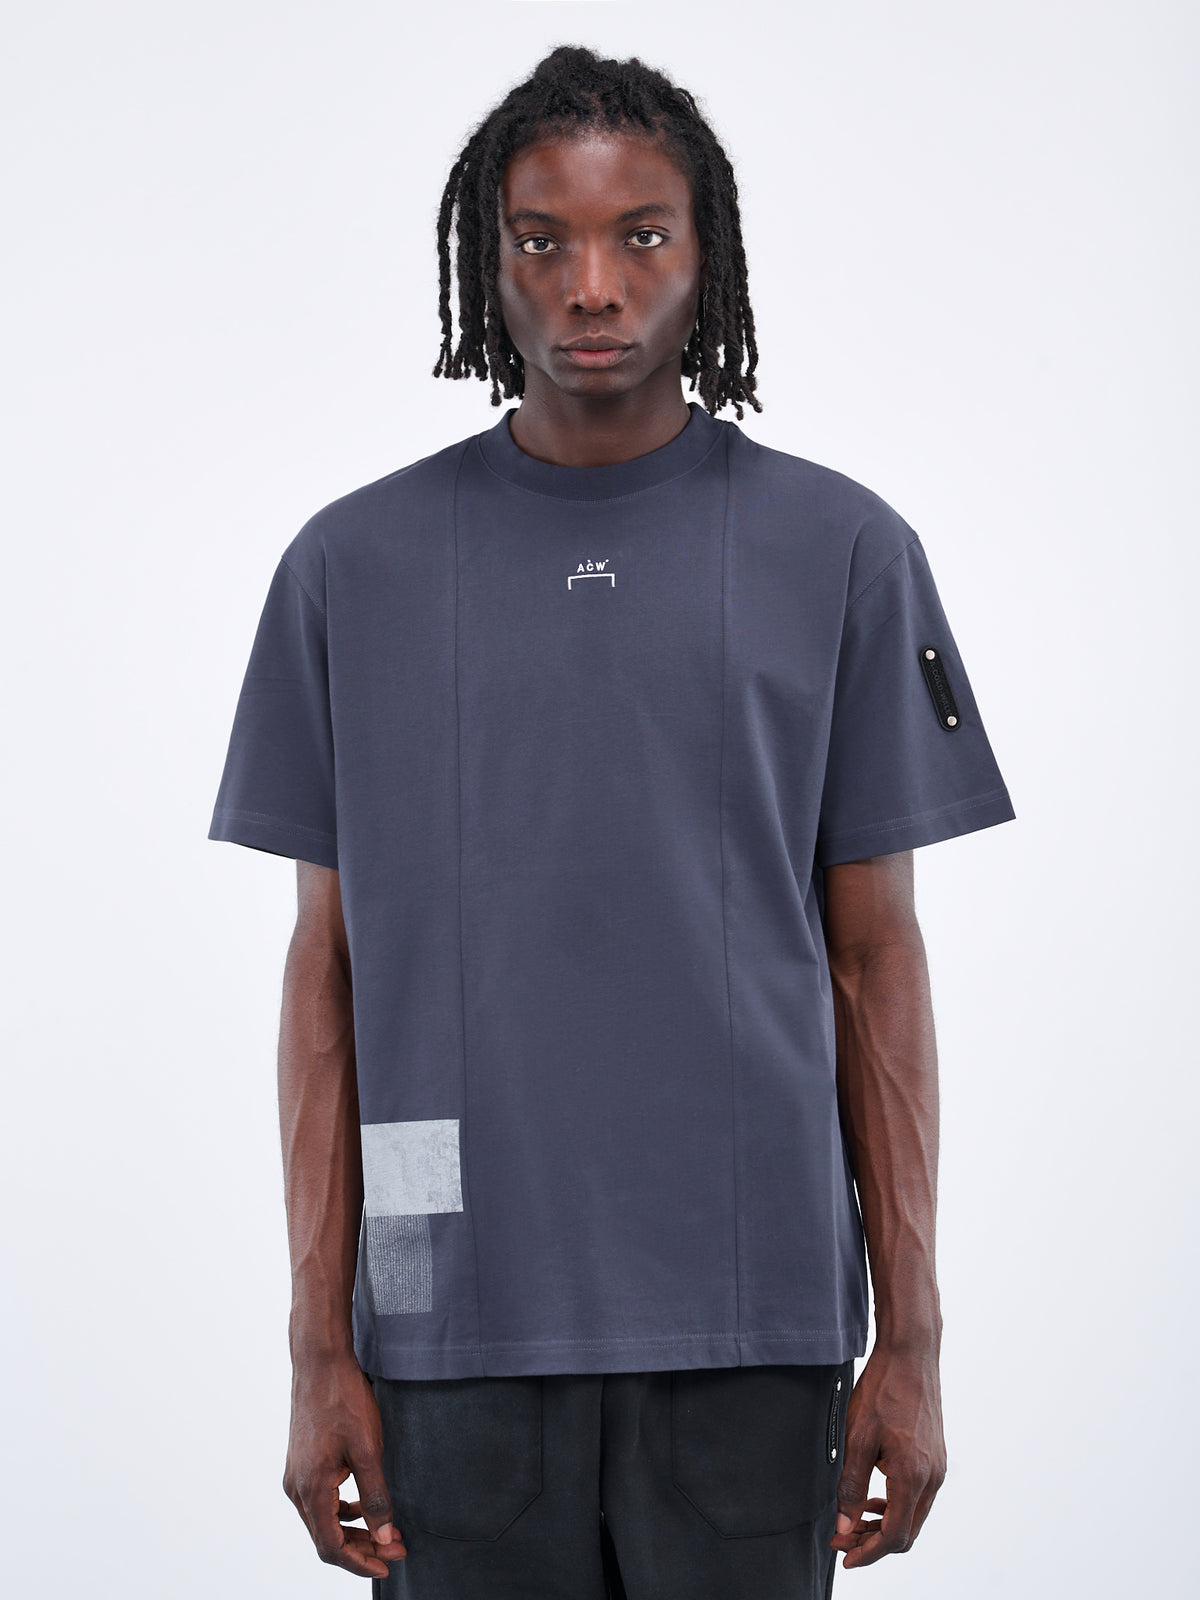 A-COLD-WALL* T-Shirt | H. Lorenzo - front